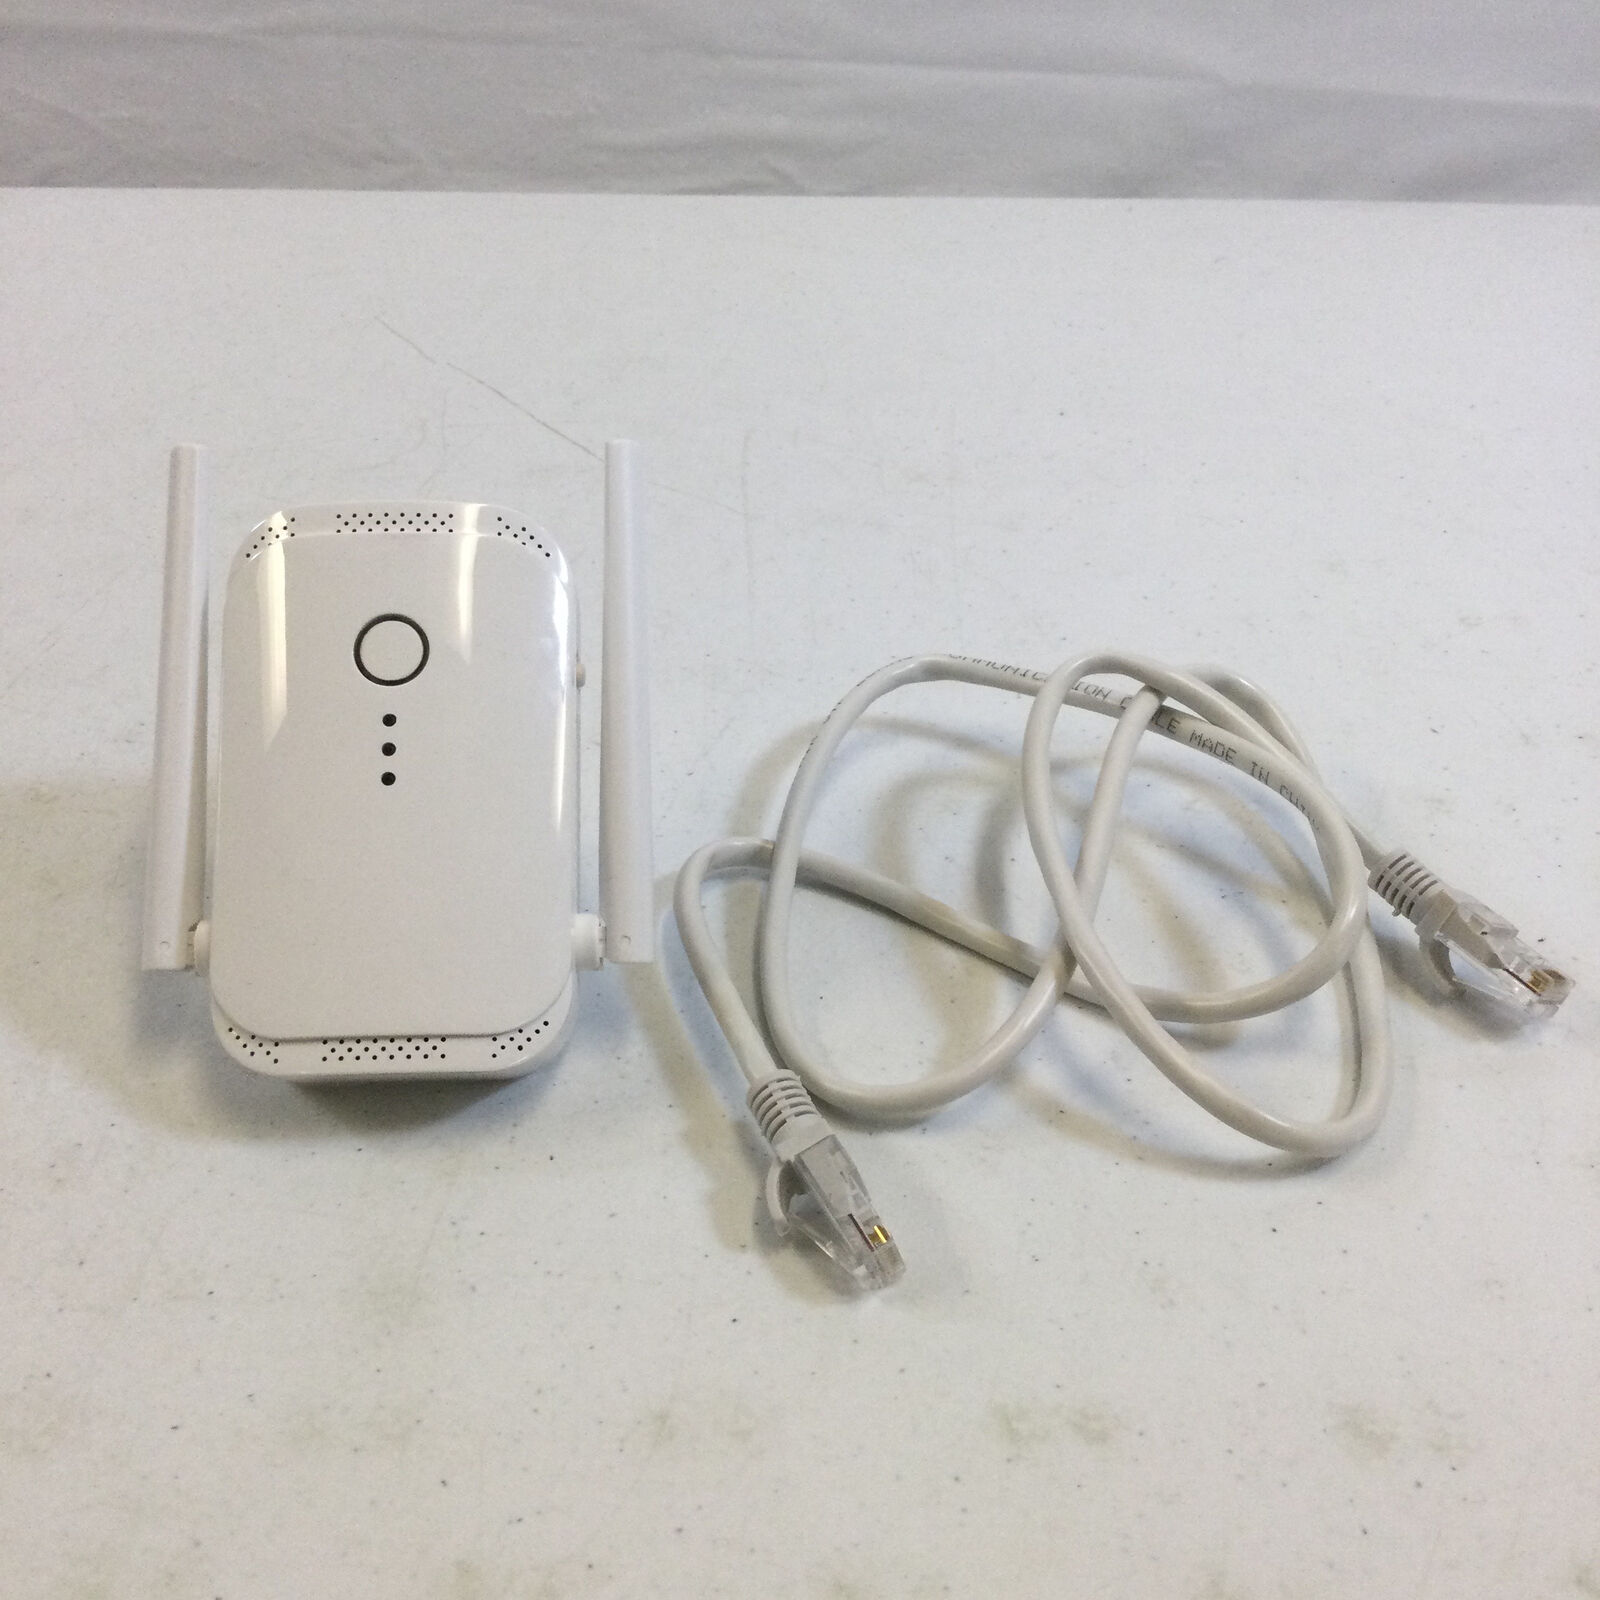 Macard N300 White Wireless High Speed WiFi Signal Range Booster Extender Used